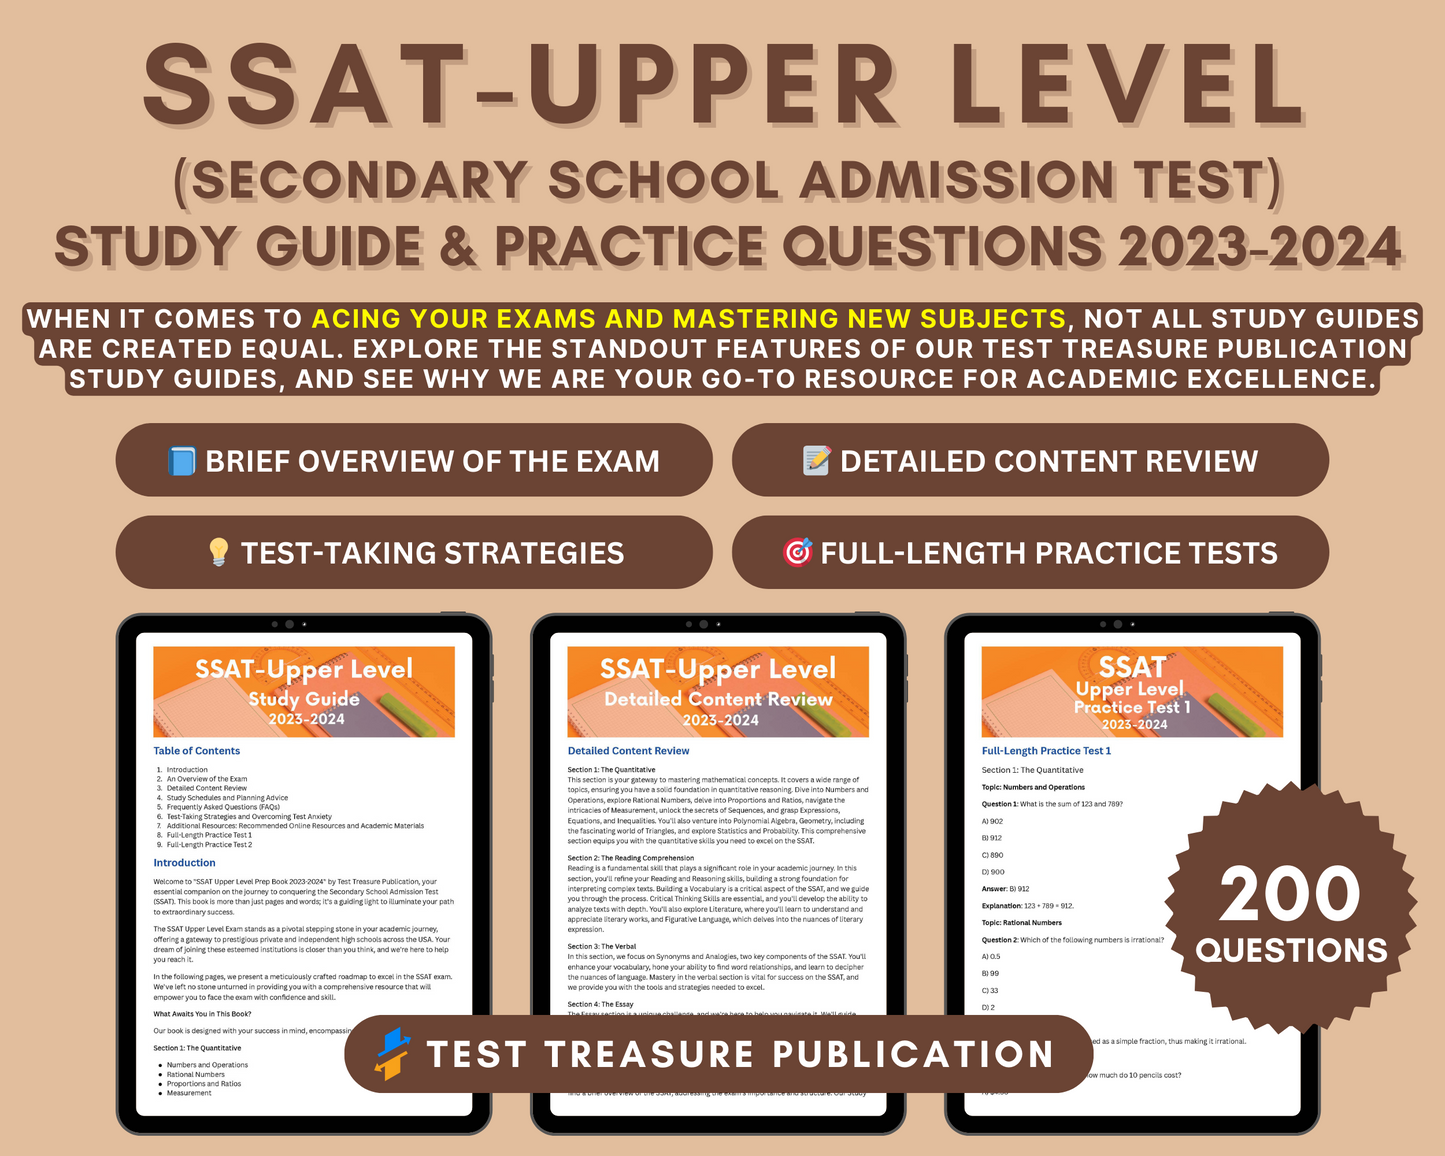 SSAT Upper Level Exam Study Guide 2023-24: In-Depth Content Review, & Practice Tests - Your Key to Top U.S. High Schools